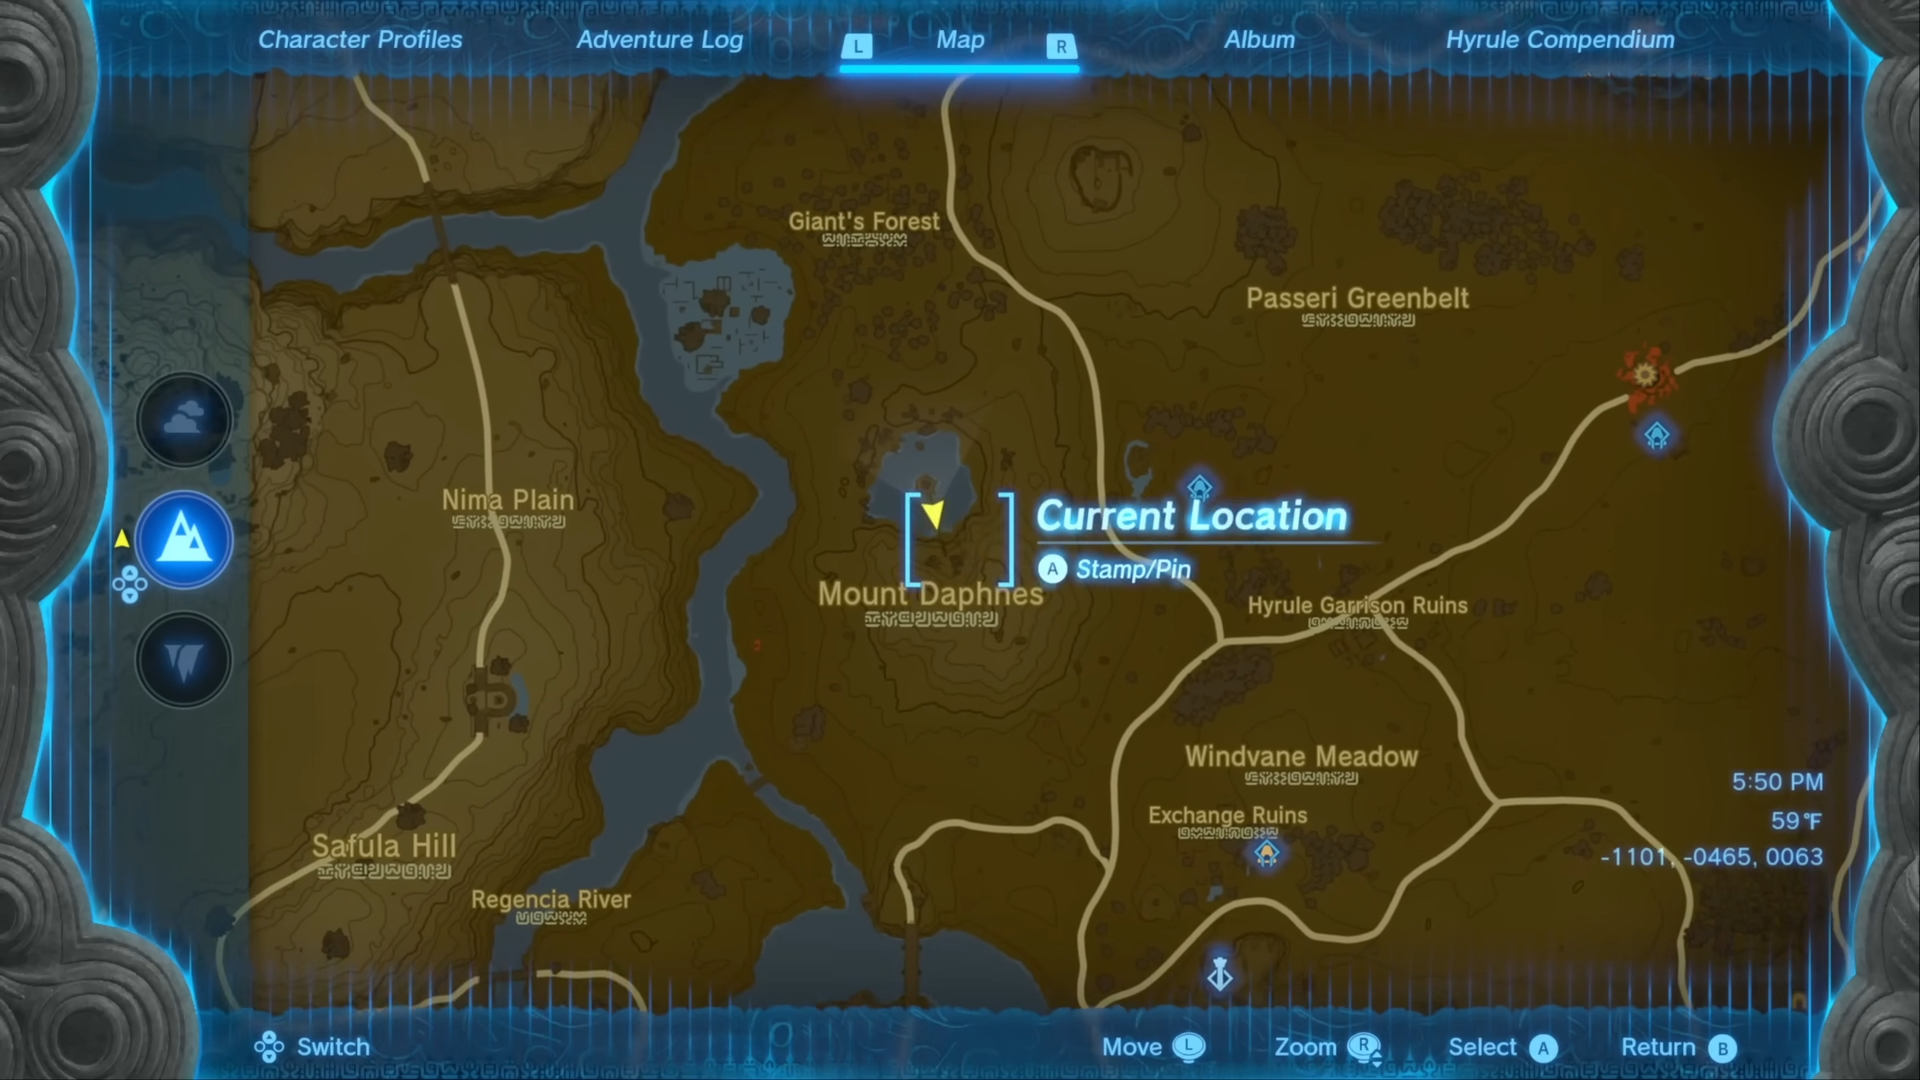 A map of Hyrule that shows the location of the Fierce Deity armor.